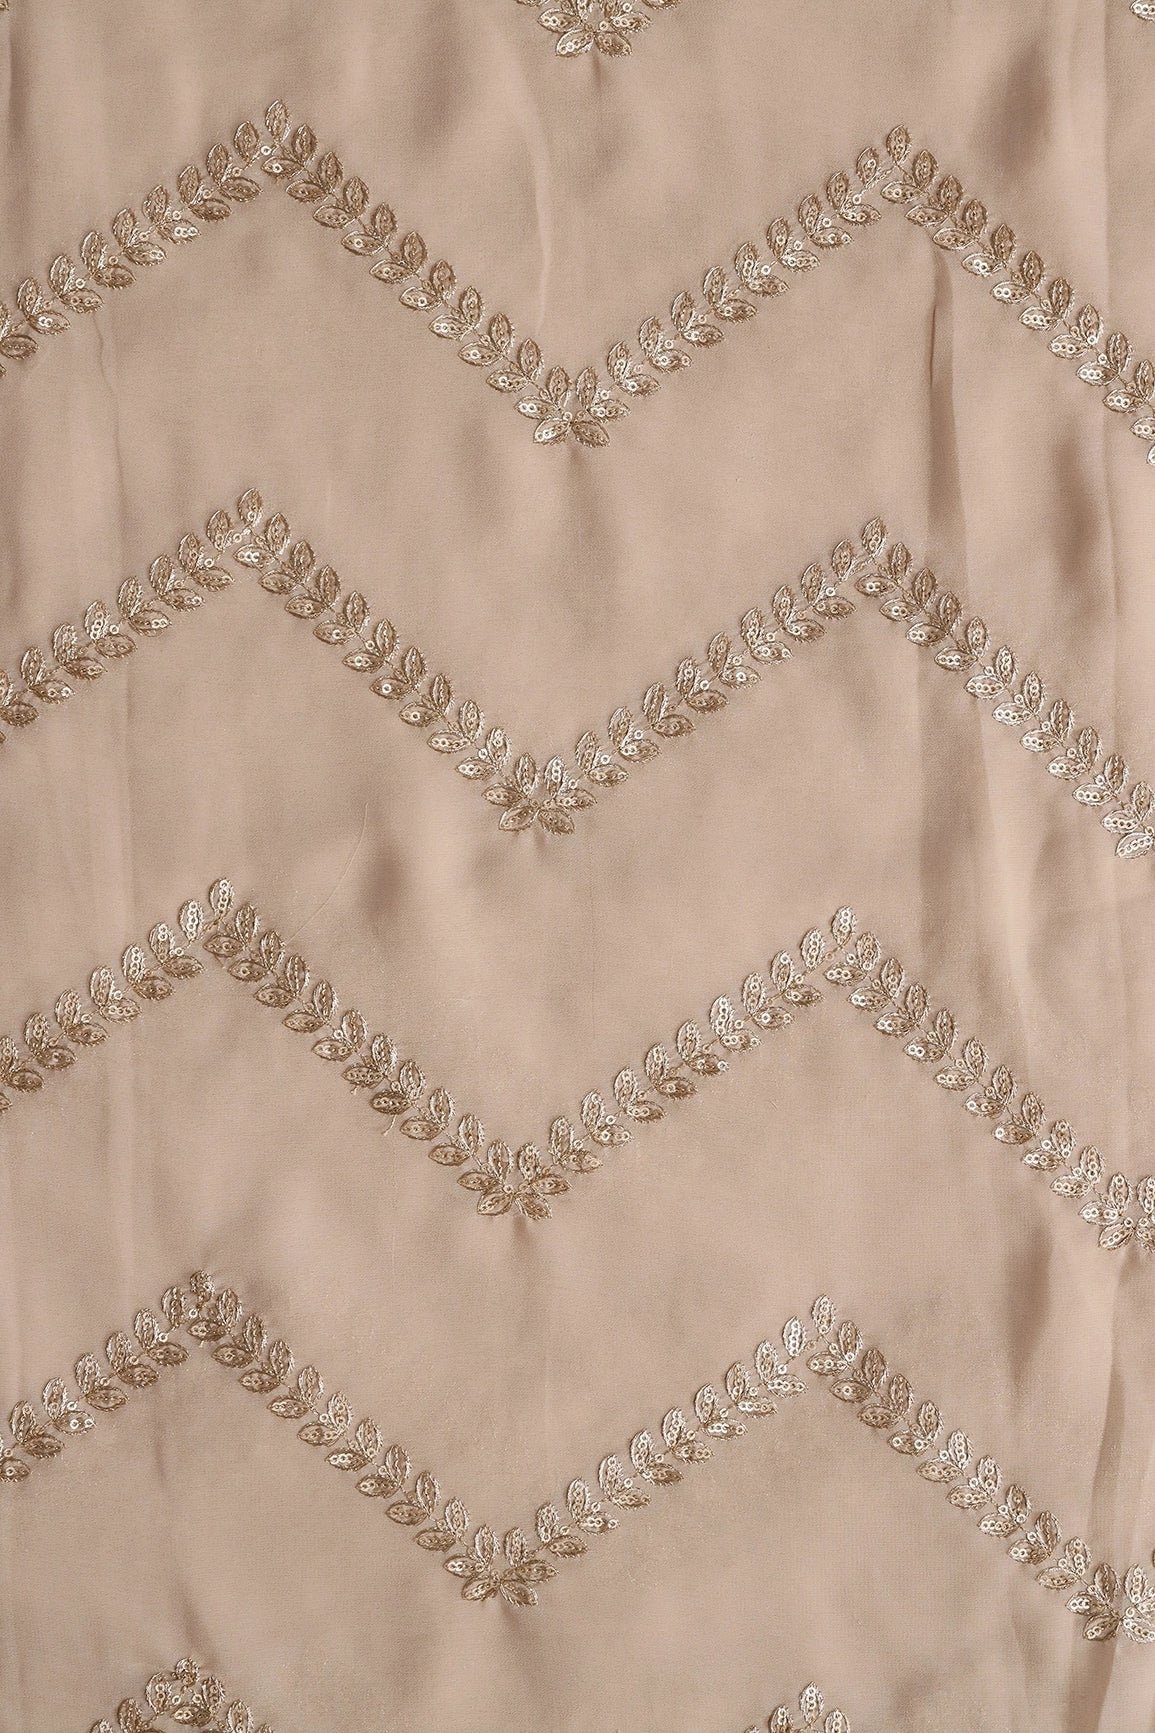 Gold Zari With Gold Sequins Chevron Embroidery Work On Beige Georgette Fabric - doeraa